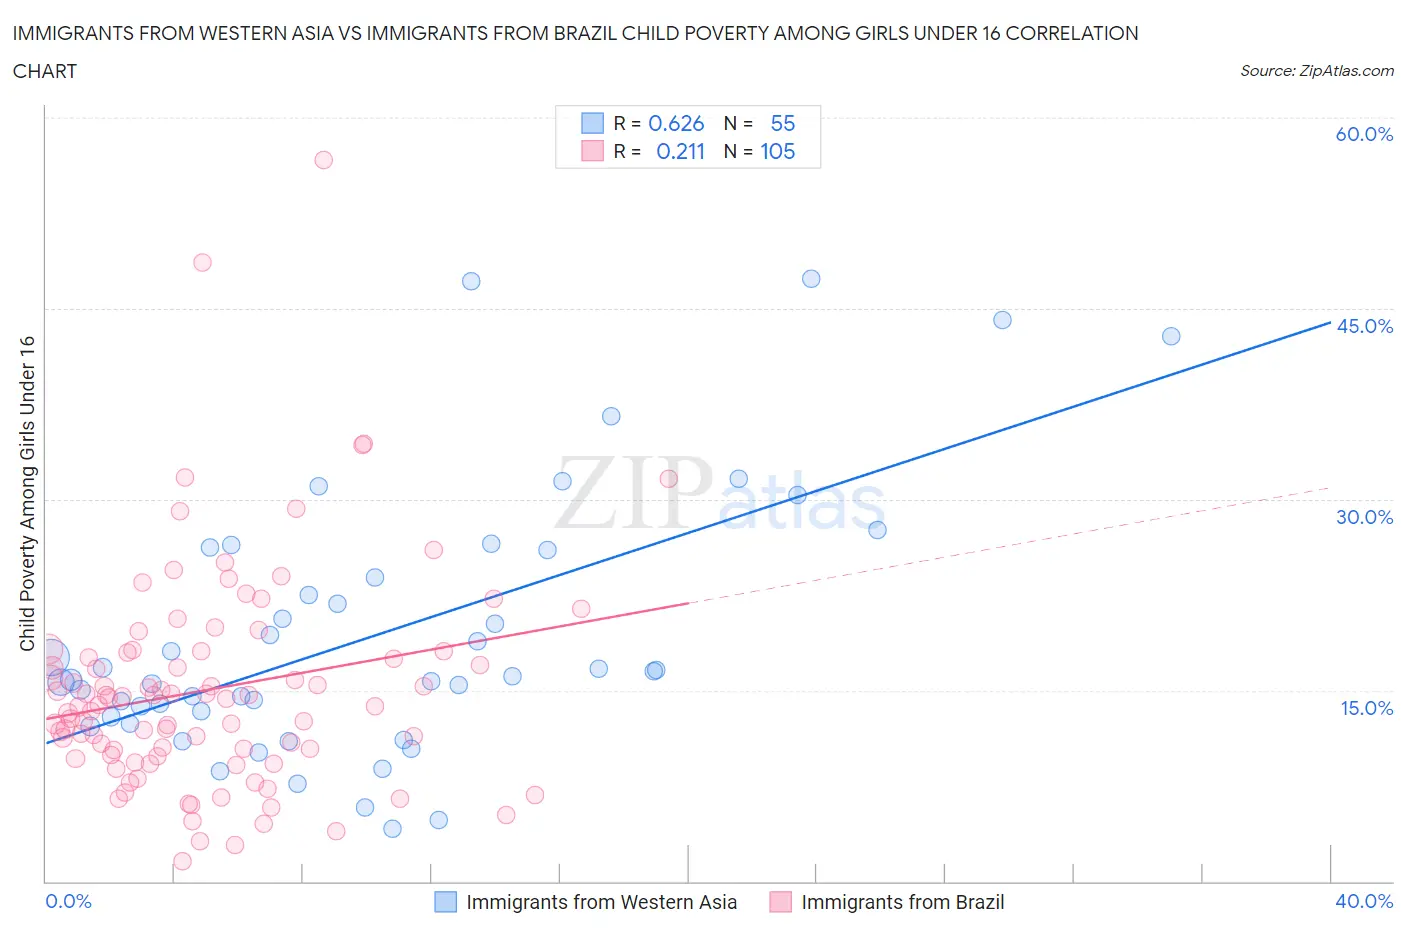 Immigrants from Western Asia vs Immigrants from Brazil Child Poverty Among Girls Under 16